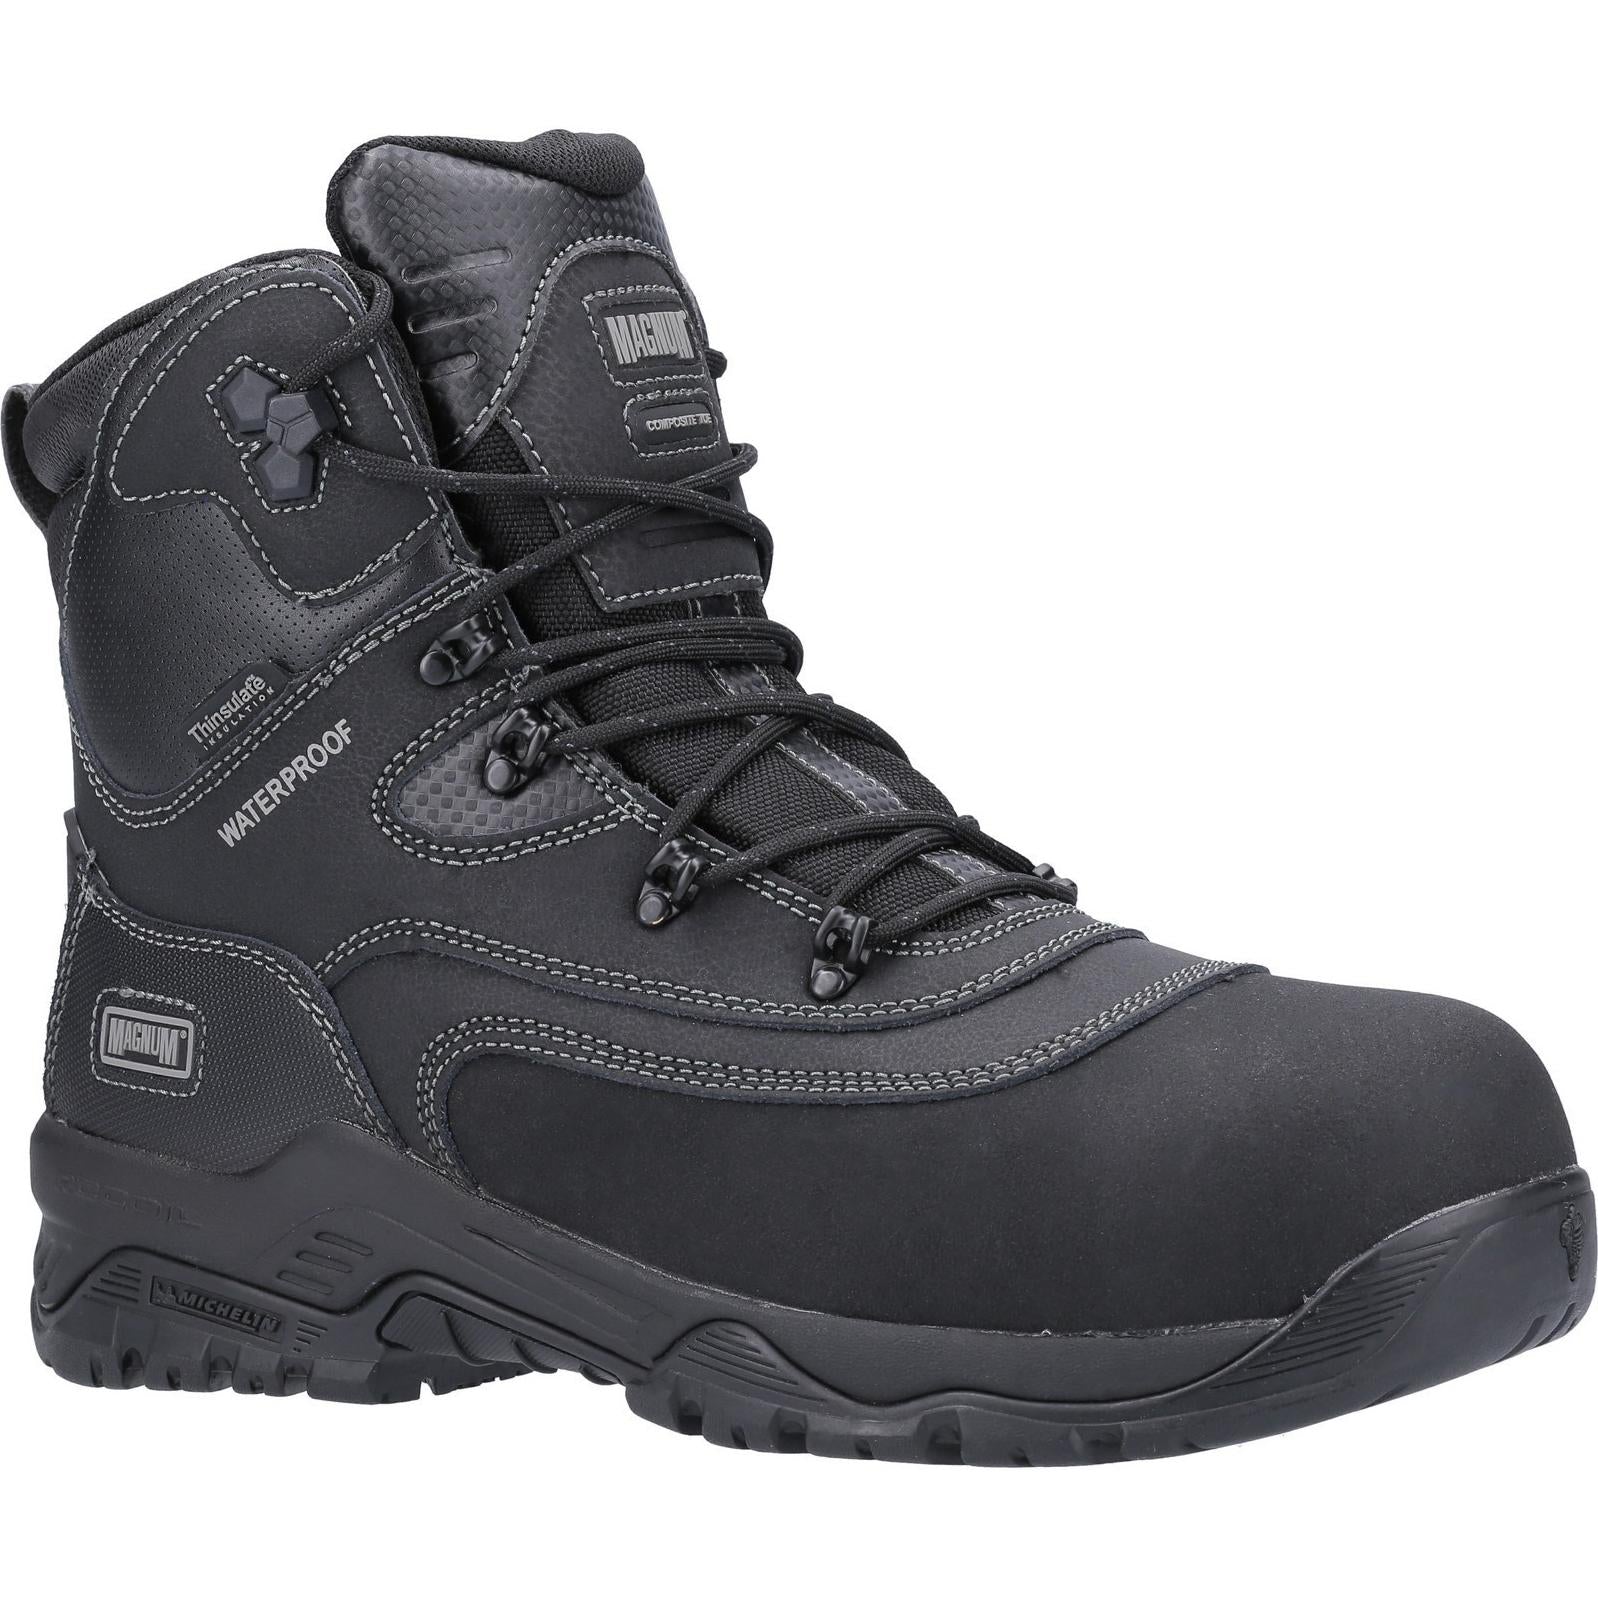 Magnum Broadside 8.0 Waterproof Safety Boots